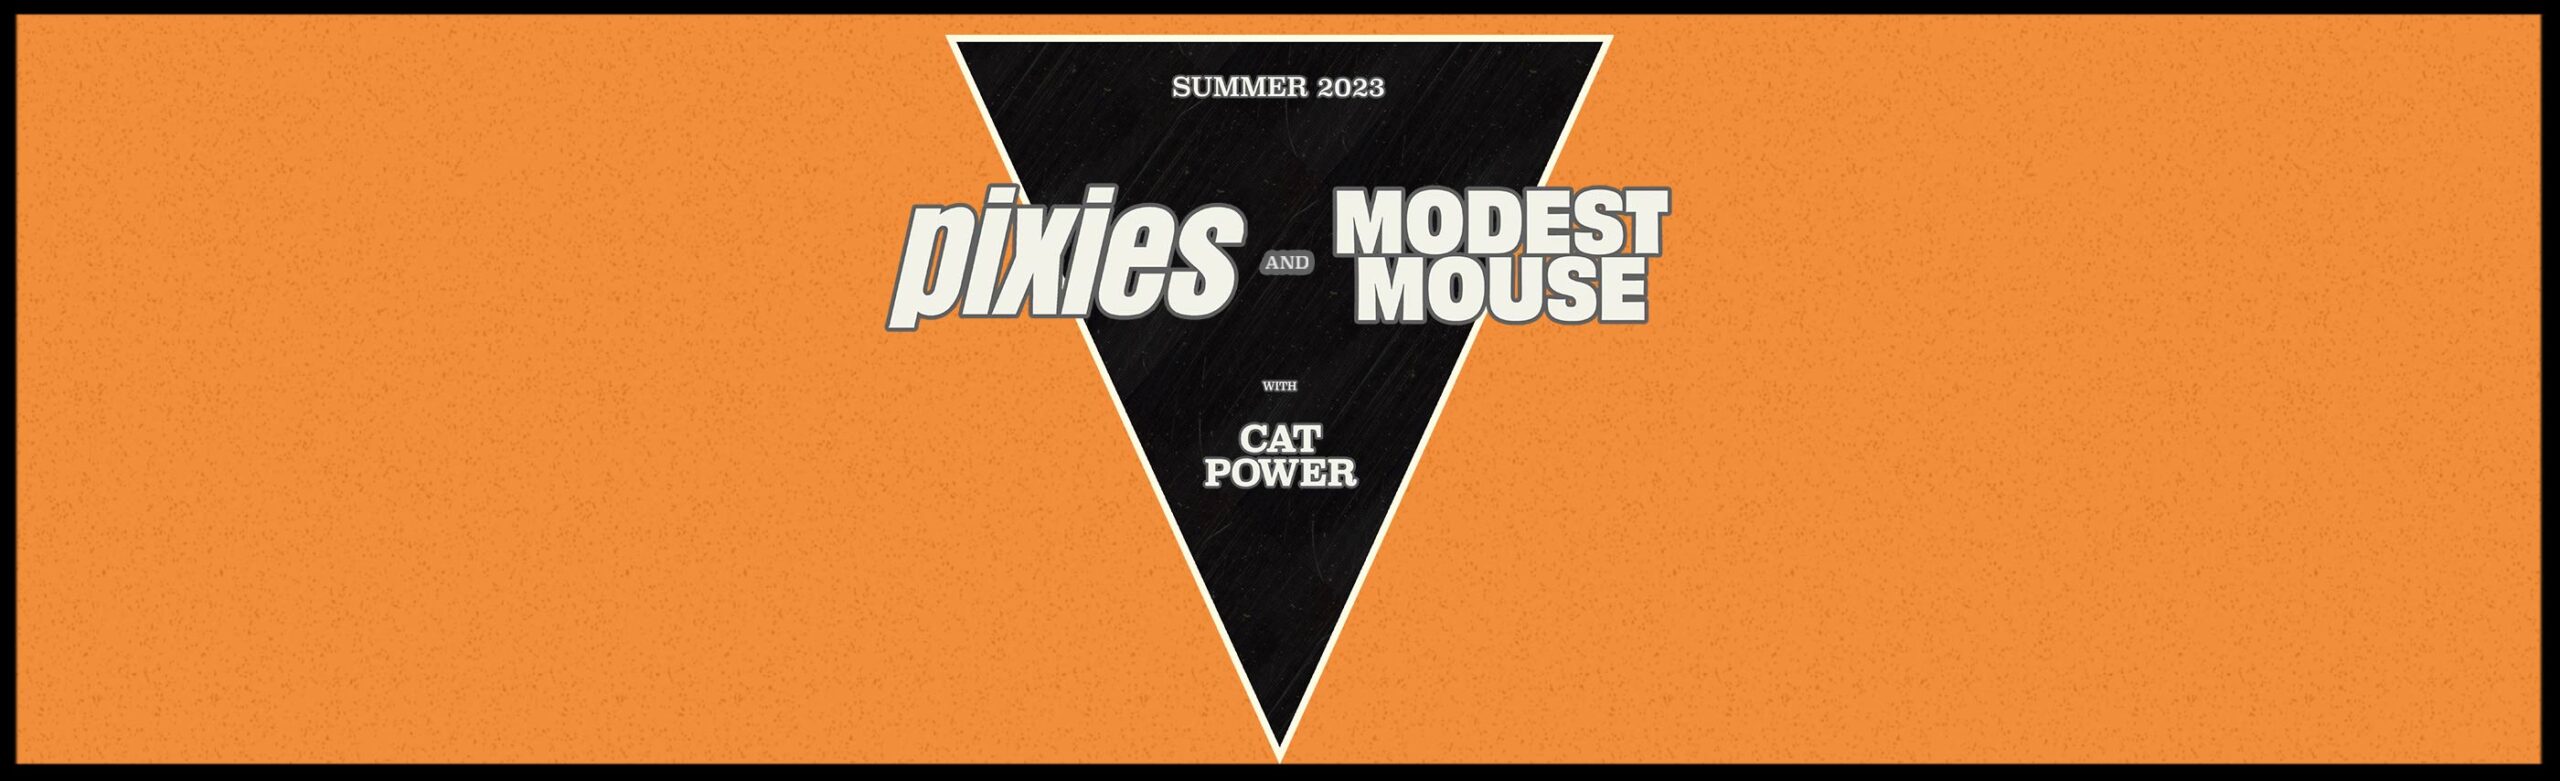 Event Info: Pixies and Modest Mouse at KettleHouse Amphitheater 2023 Image